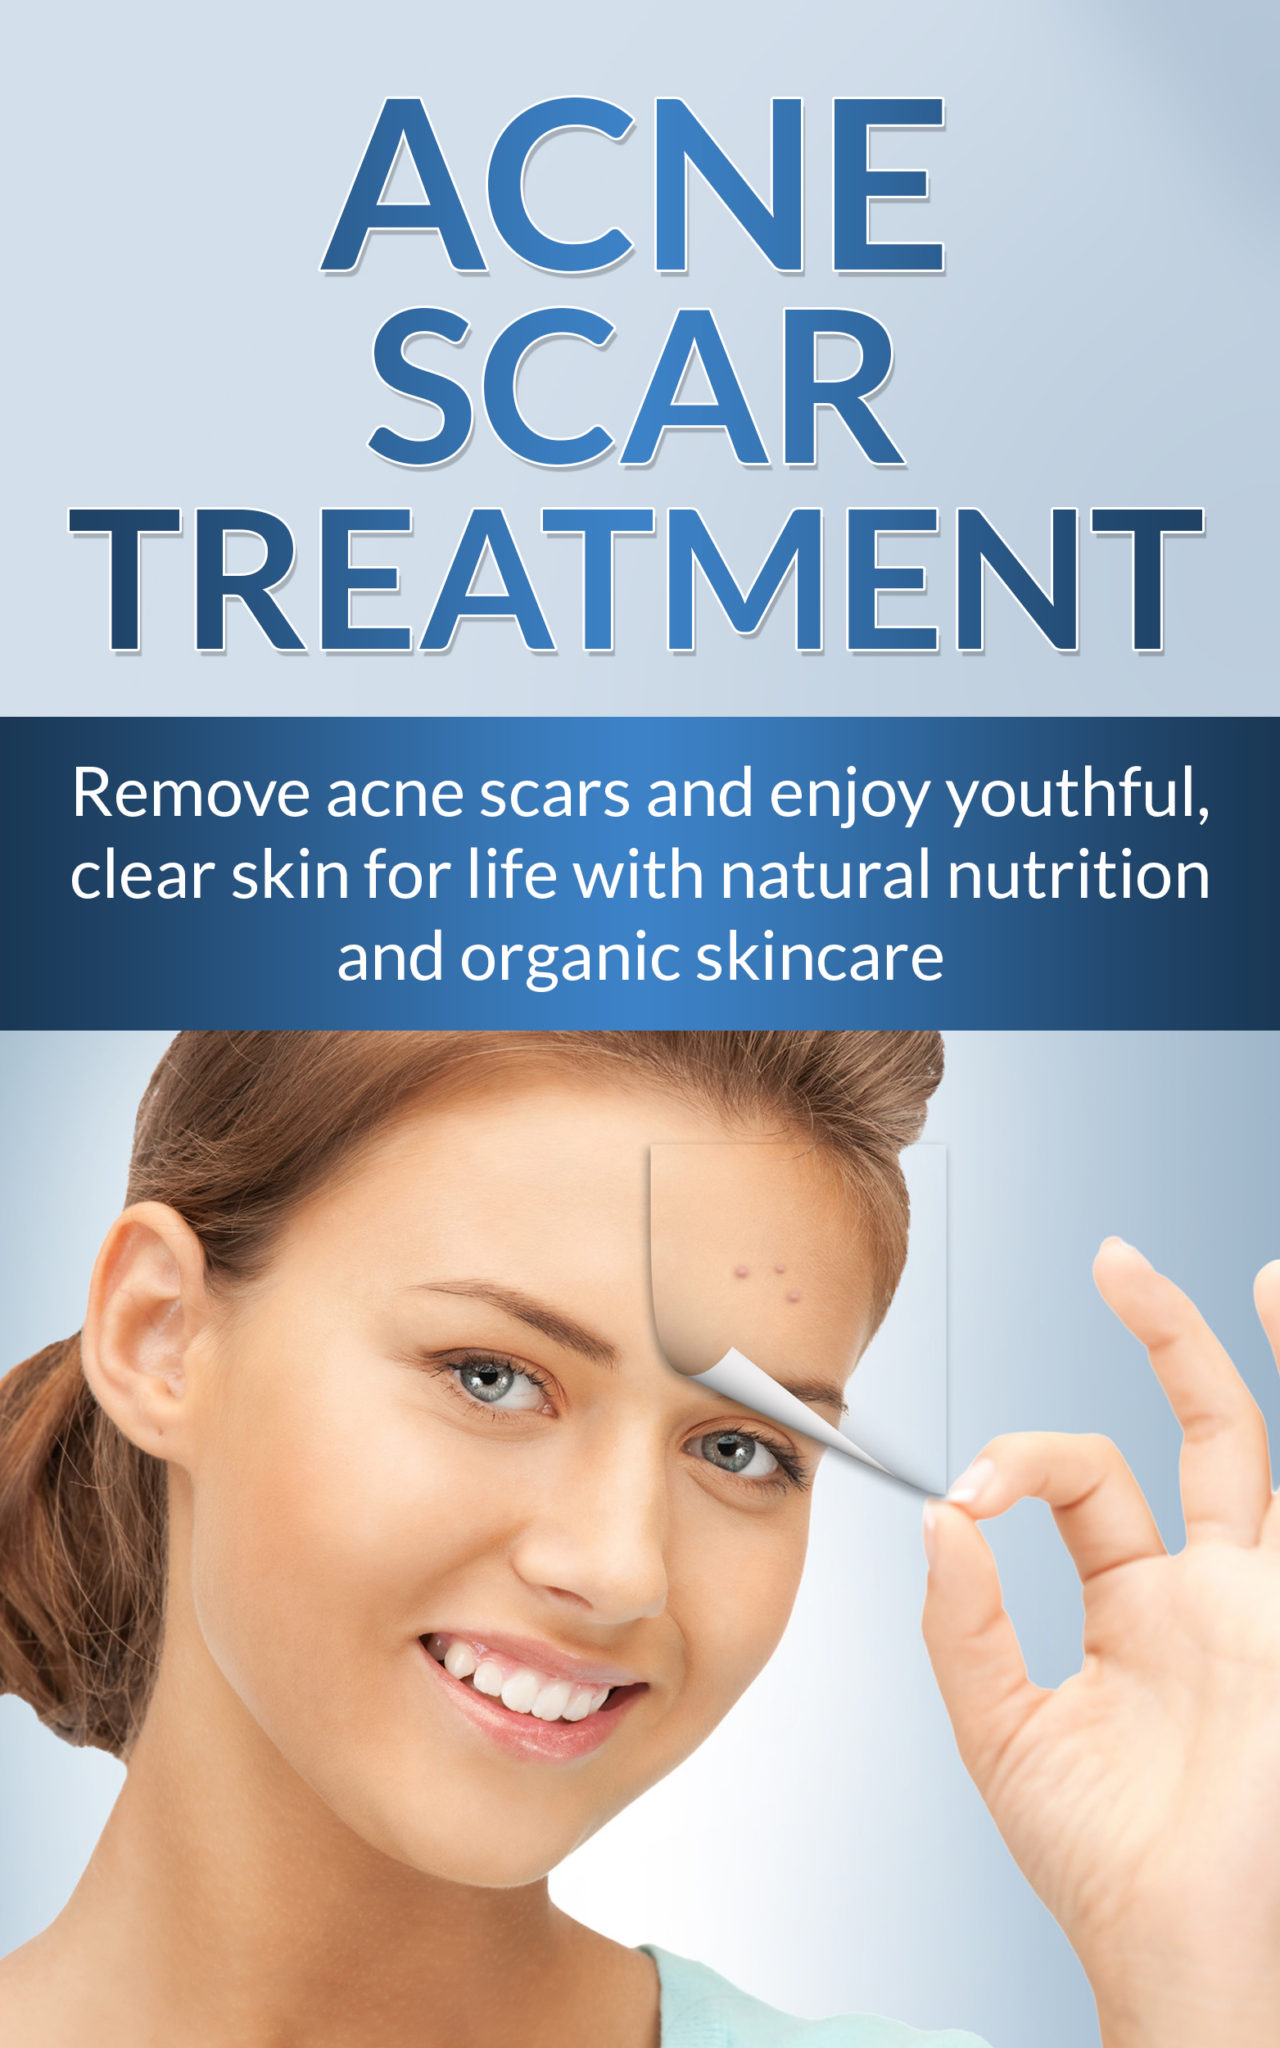 Acne Scar Treatment: Remove Acne Scars For Life With Natural Nutrition And Organic Skincare by Jennifer